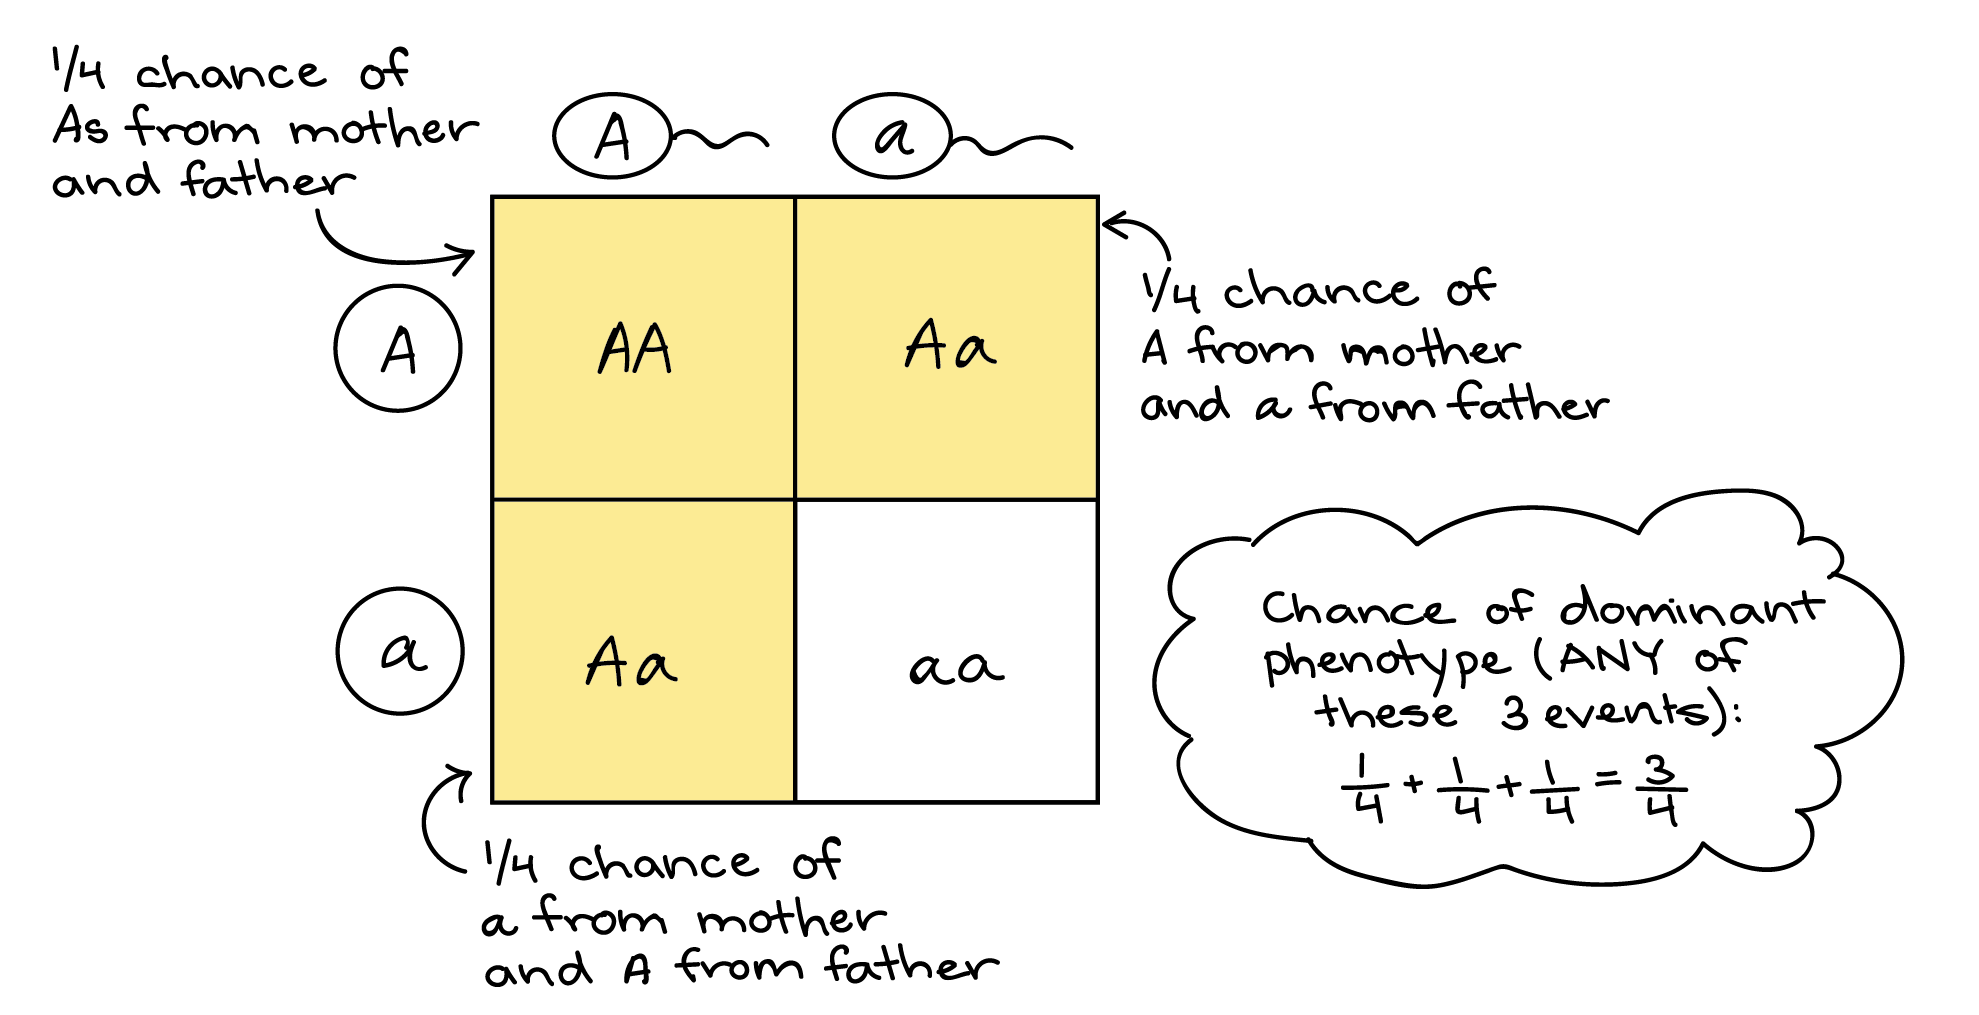 Illustration of how a Punnett square can represent the sum rule. Punnett square:||A|a-|-|-|-A||**AA**|**Aa**a||**Aa**|aa The **bolded** boxes represent events that result in a dominant phenotype (AA or Aa genotype). In one, an A sperm combines with an A egg. In another, an A sperm combines with an a egg, and in a third, an a sperm combines with an A egg. Each event has a 1/4 chance of happening (1 out of 4 boxes in the Punnett square). The chance that any of these three events will occur is 1/4+1/4+1/4 = 3/4.